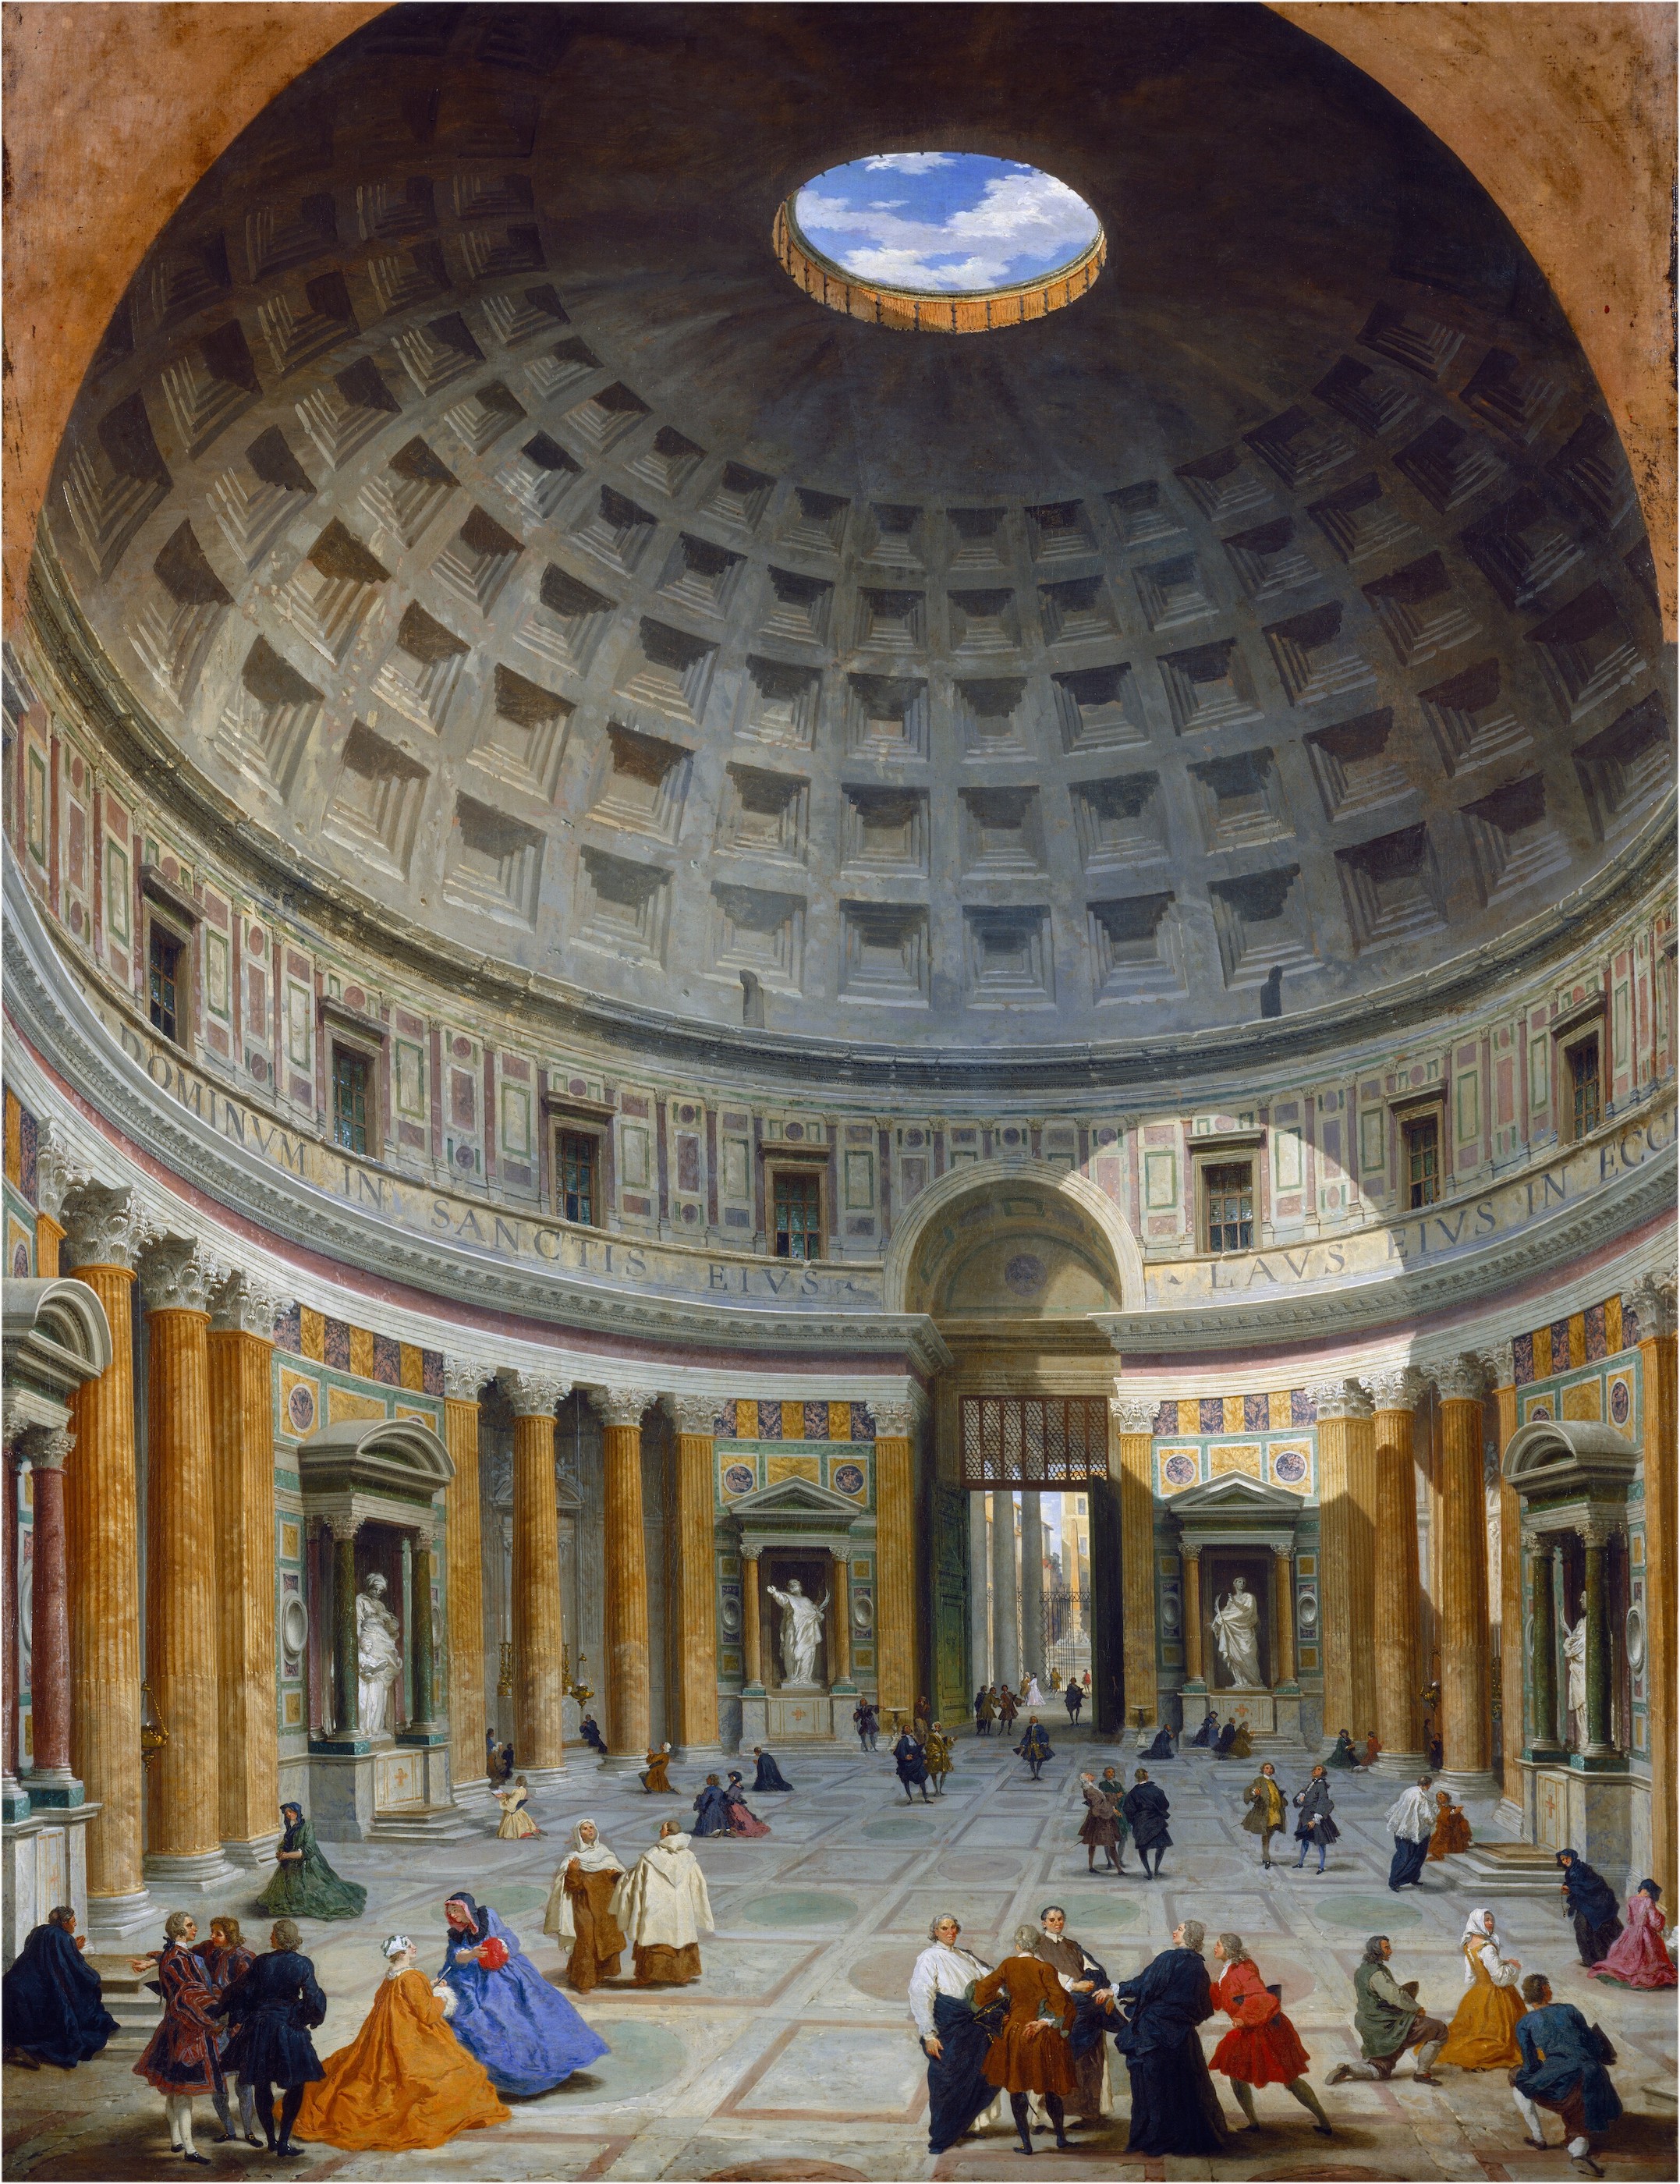 Interior of the Pantheon, Rome by Giovanni Paolo Panini - c. 1734 - 128 x 99 cm National Gallery of Art